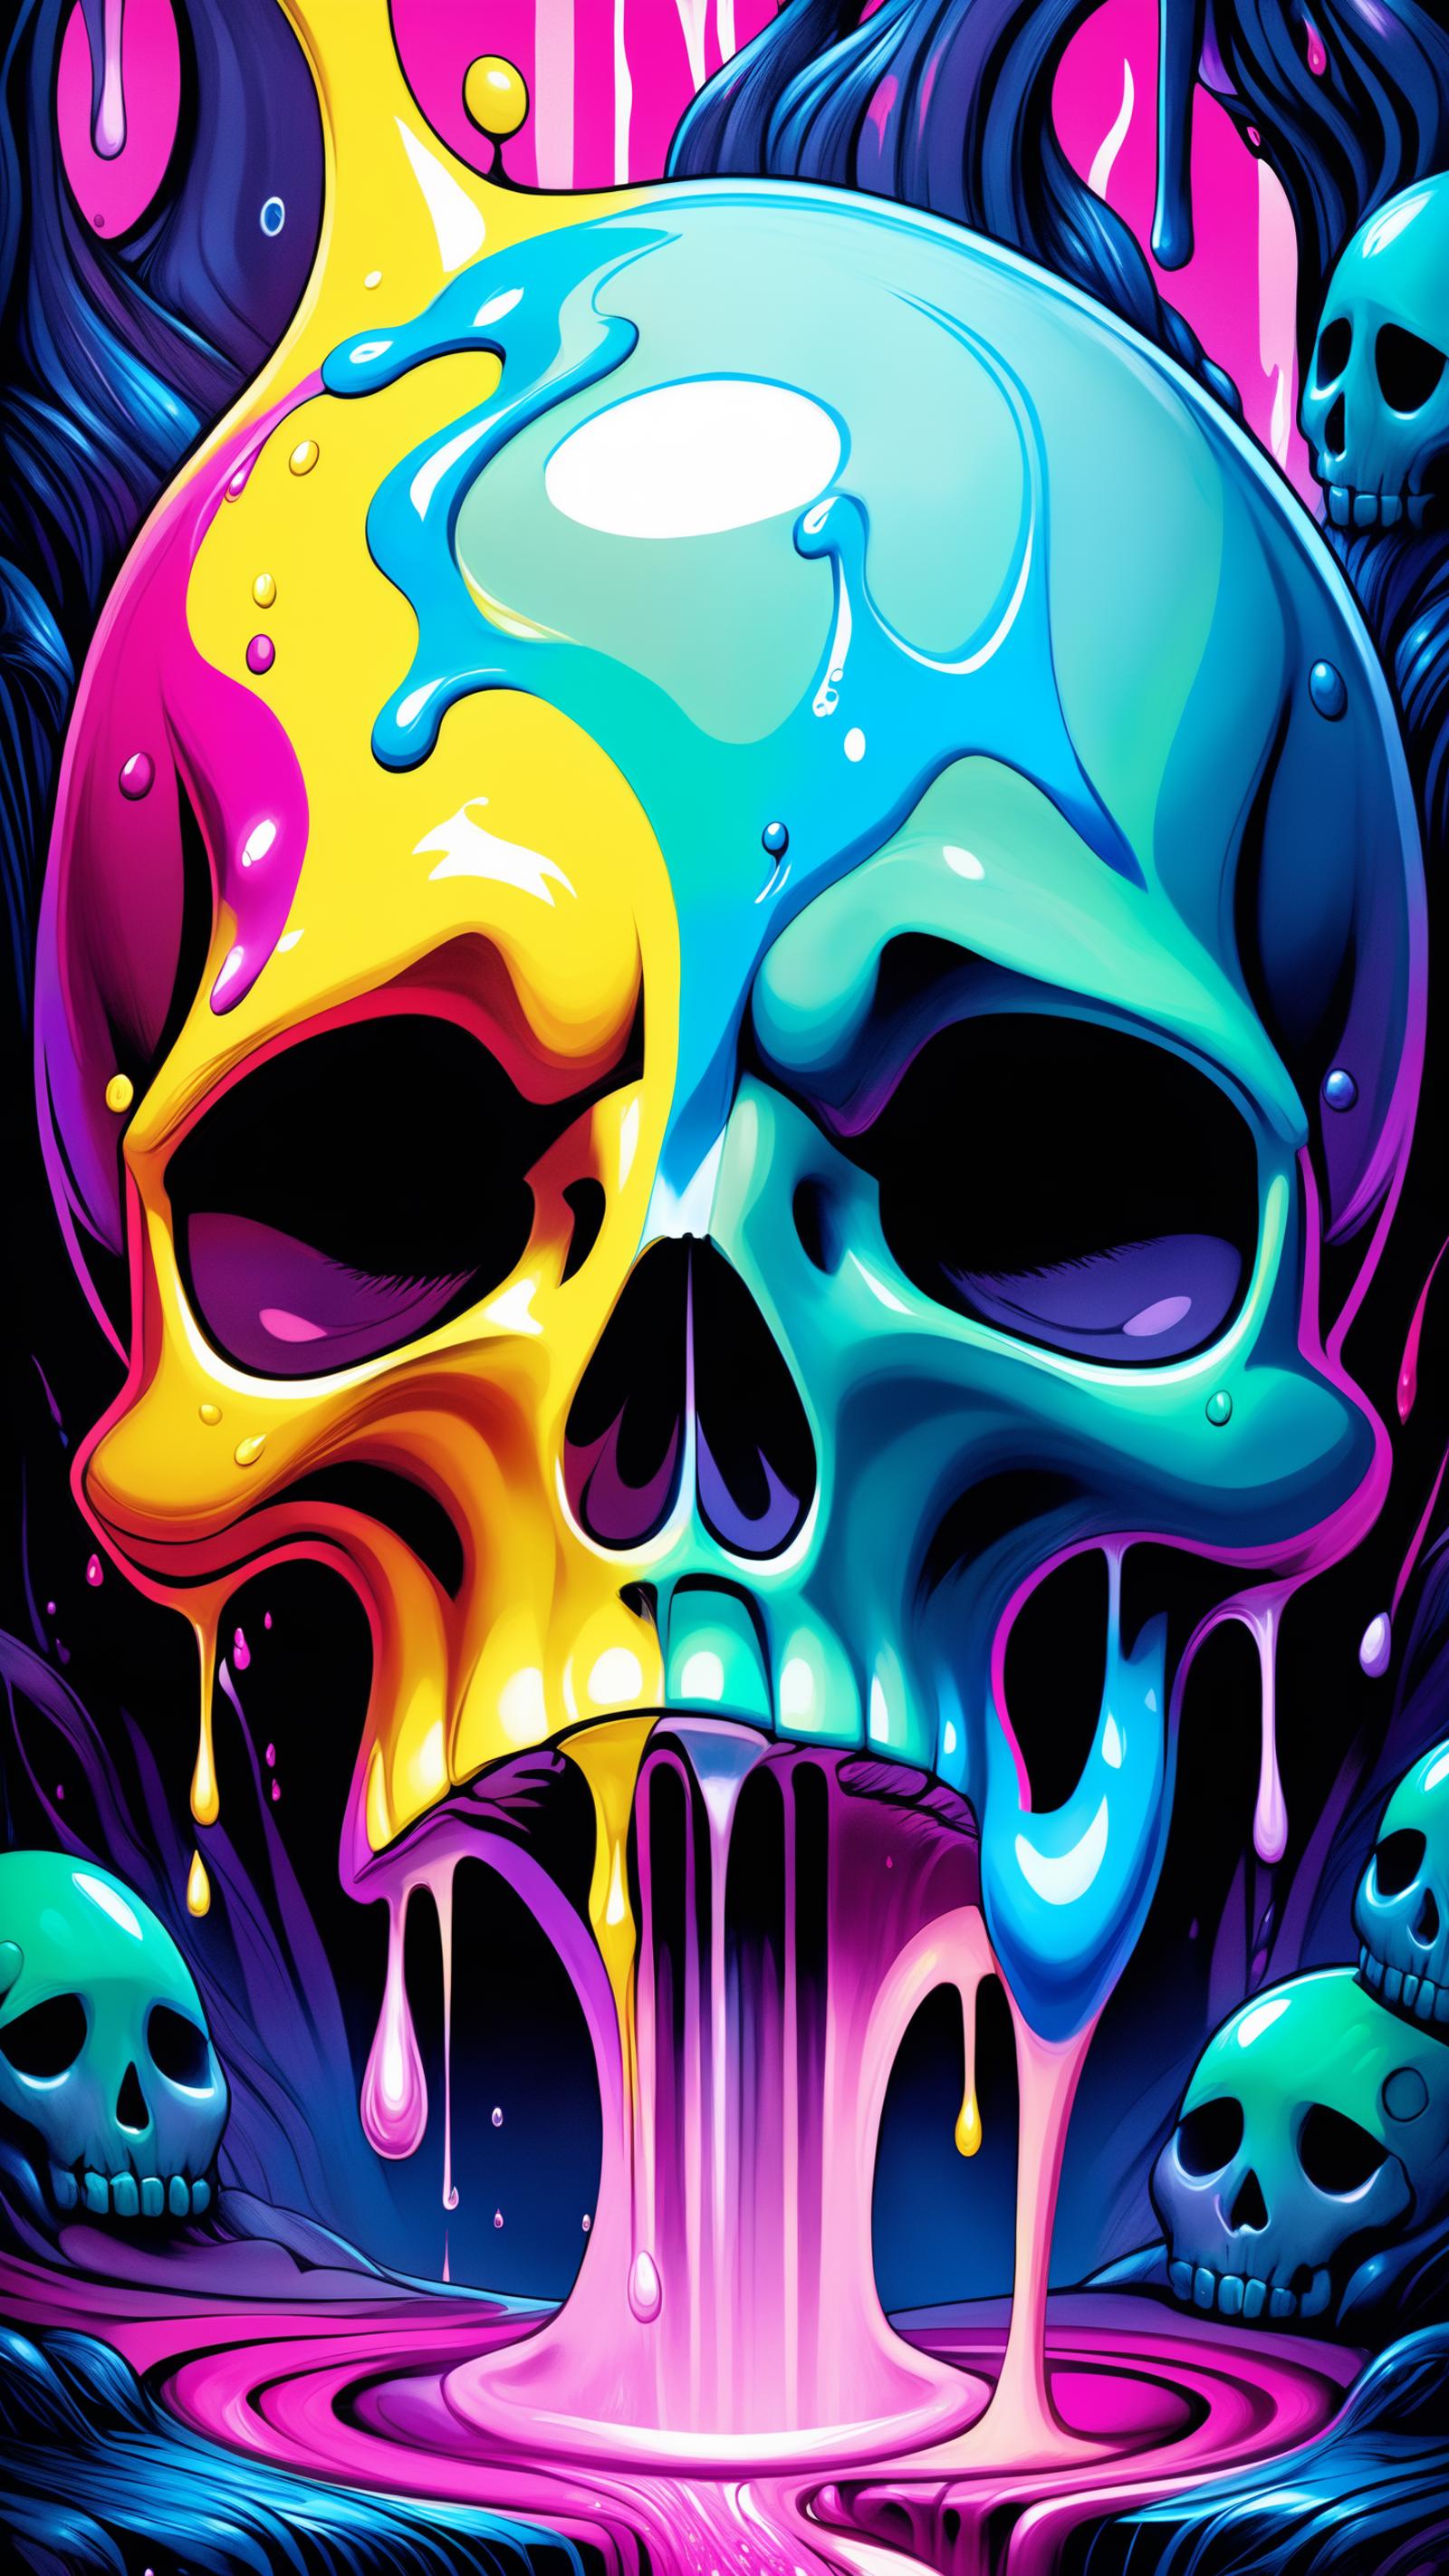 Colorful Skull with Rainbow Liquid Coming Out of Its Eye Sockets